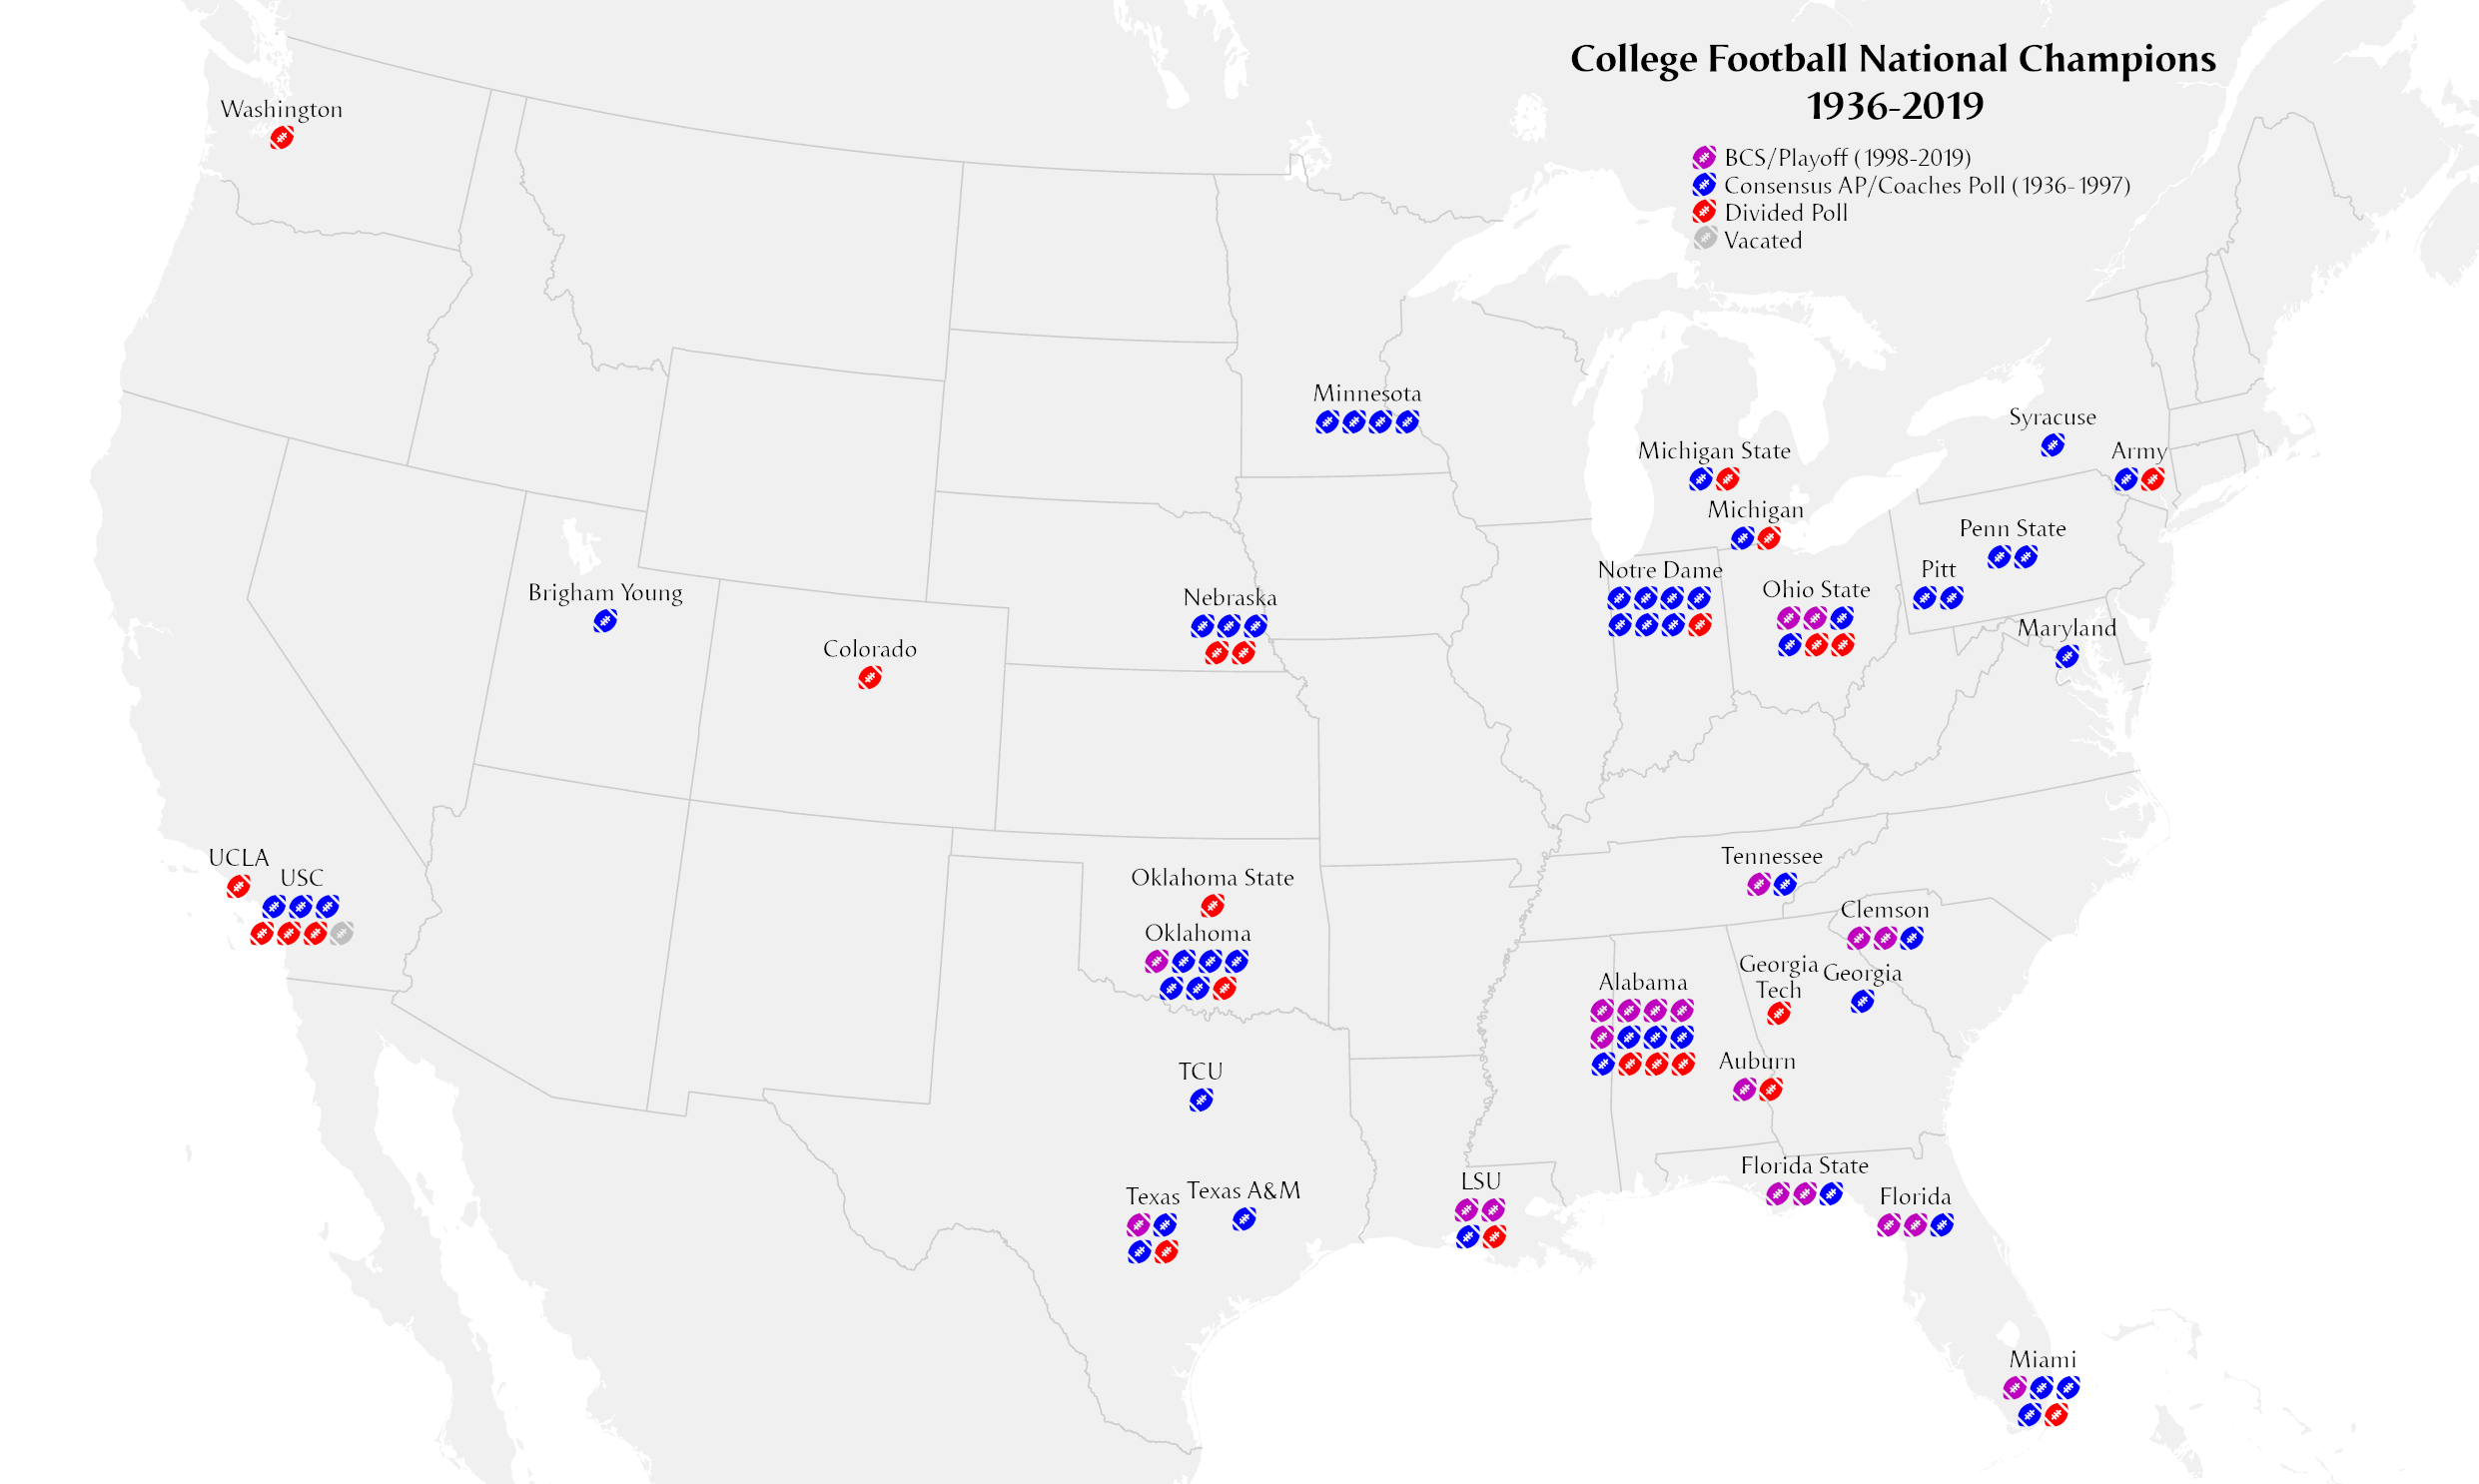 College Football Map 2020 File:college Football Champions Map.png - Wikipedia